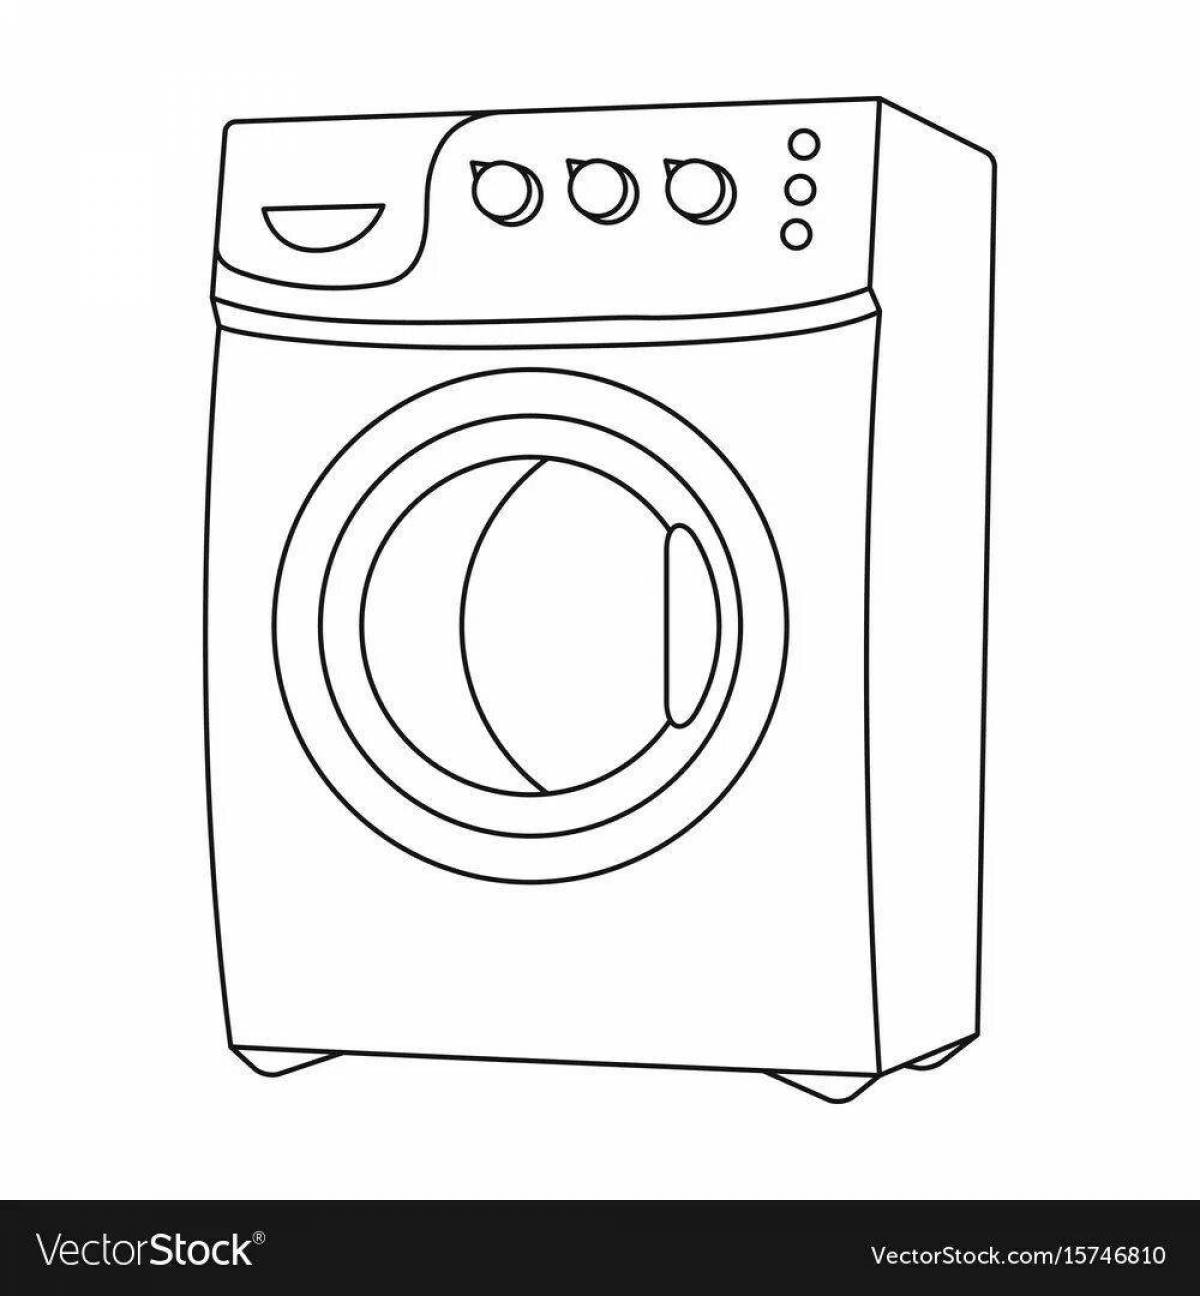 Adorable washing machine coloring page for kids